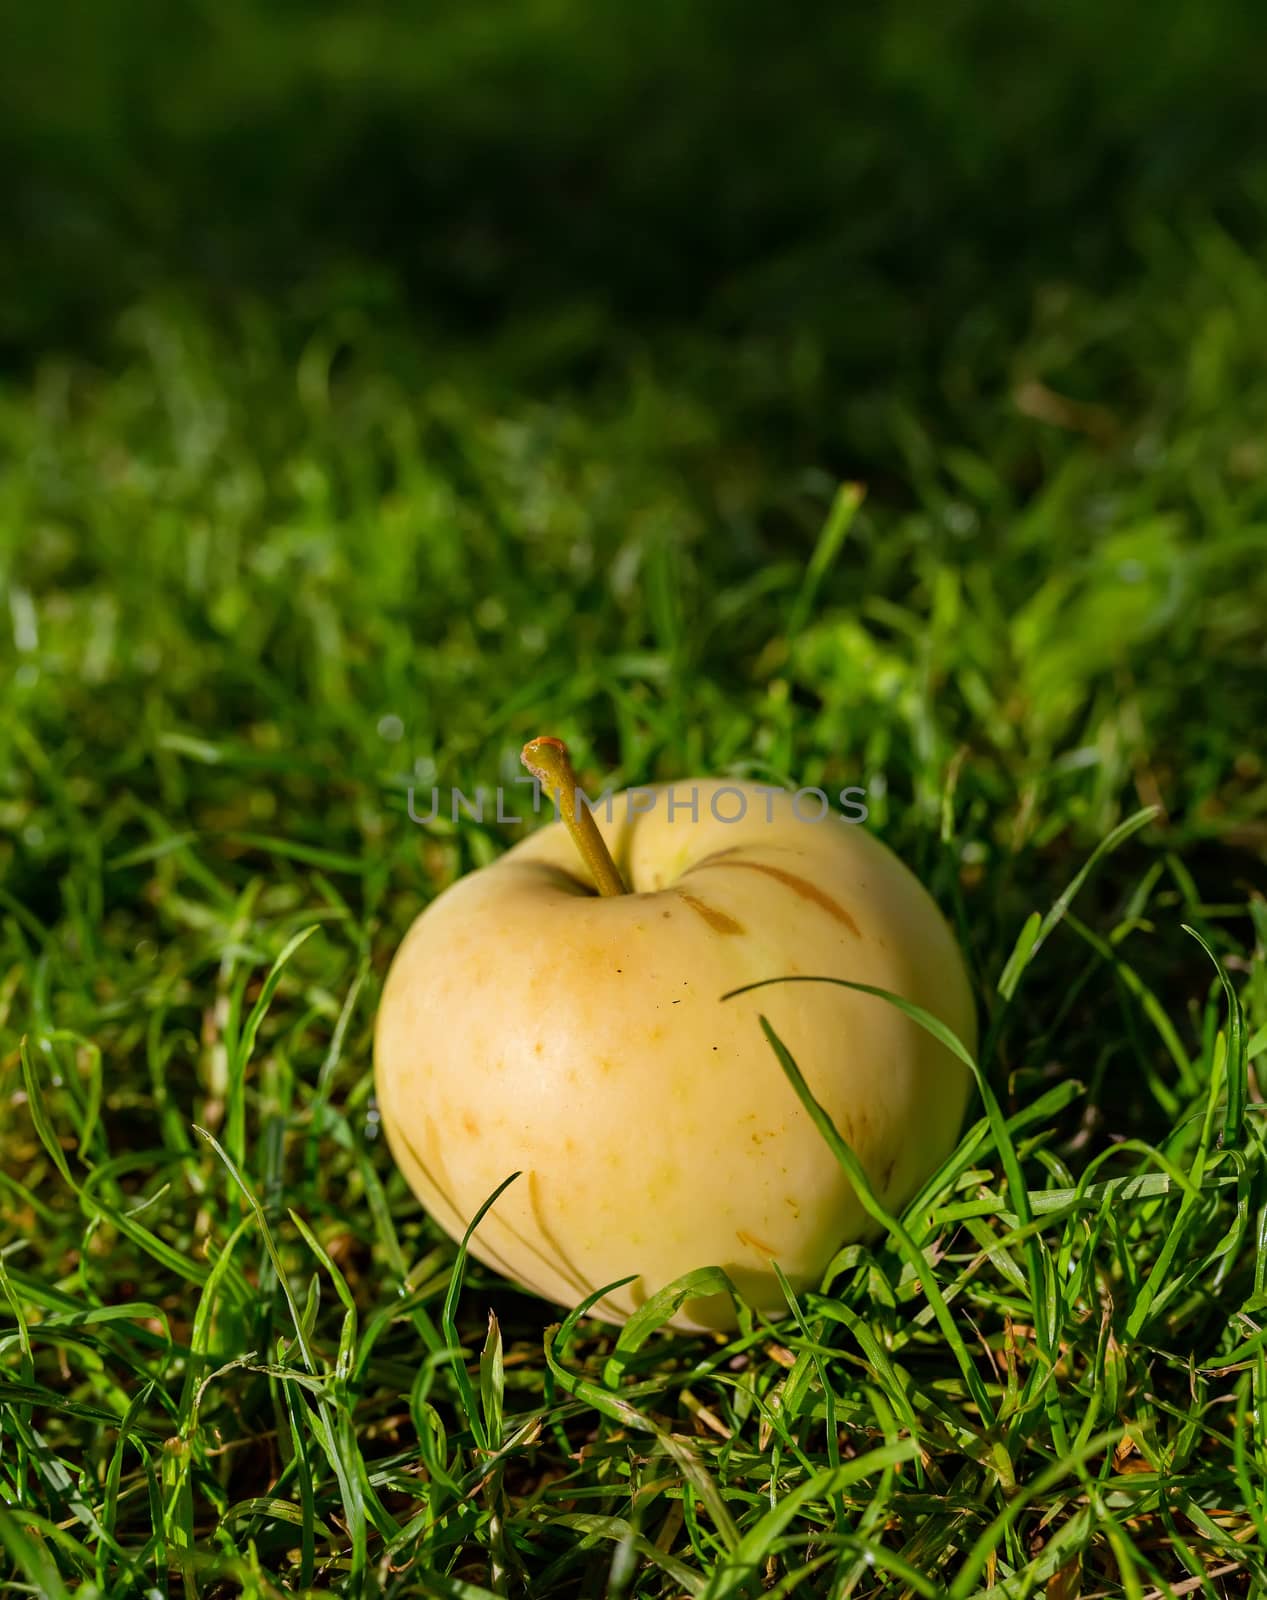 Harvest autumn. Yellow apple on green grass close-up. by 977_ReX_977